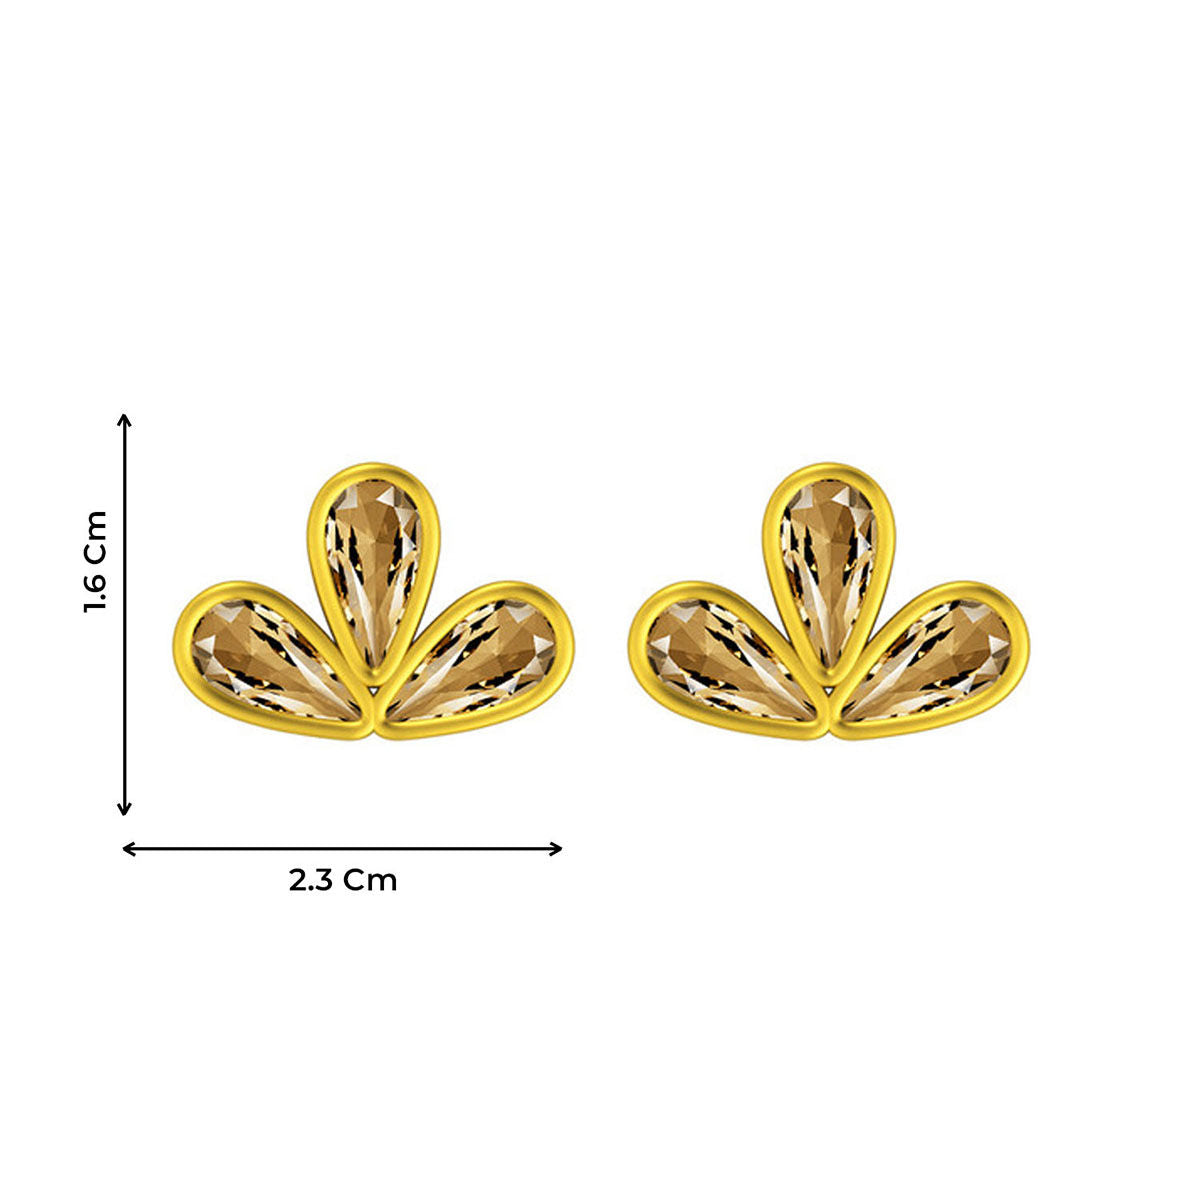 Pipa Bella Stud Earrings Brass 18k Gold Plated Base Studded with Gold Crystals